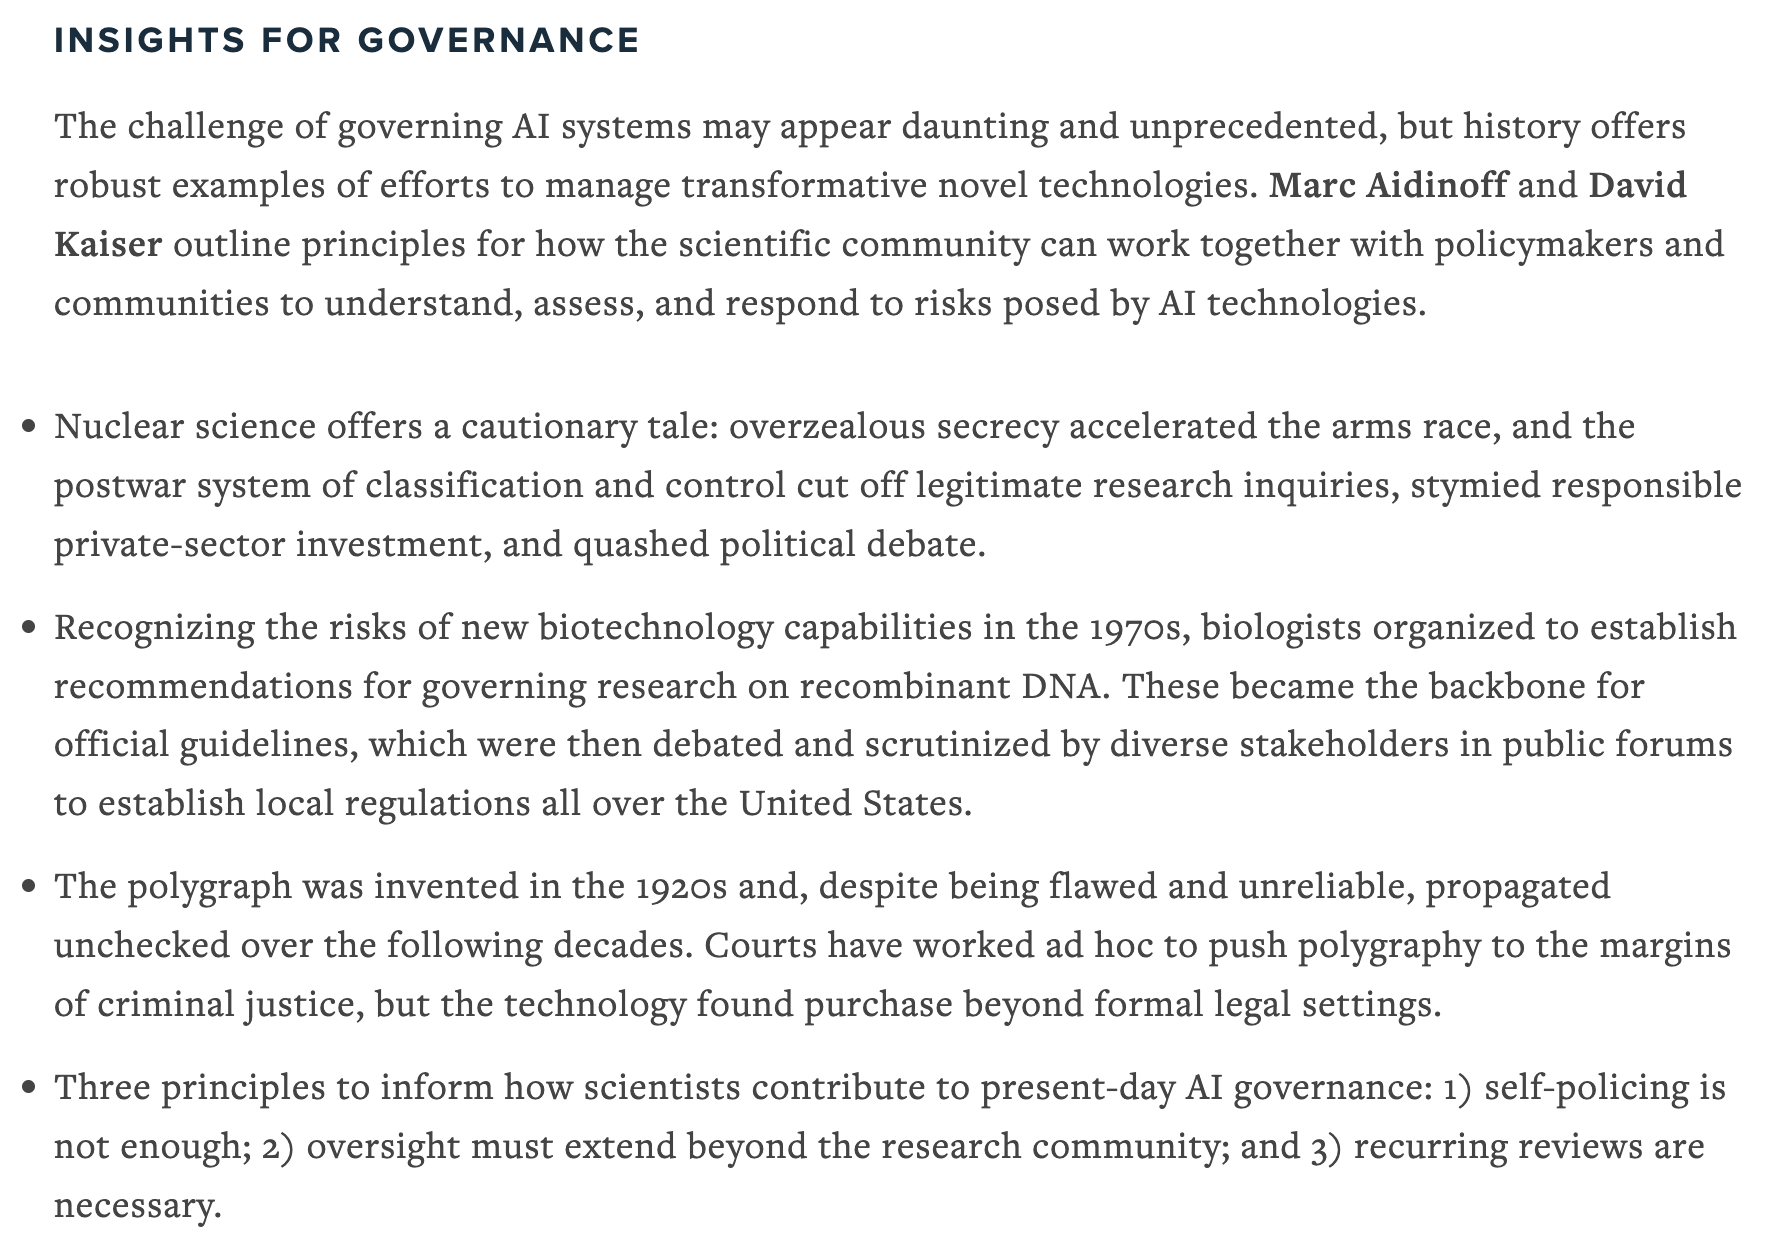 The challenge of governing AI systems may appear daunting and unprecedented, but history offers robust examples of efforts to manage transformative novel technologies. Marc Aidinoff and David Kaiser outline principles for how the scientific community can work together with policymakers and communities to understand, assess, and respond to risks posed by AI technologies.
•	Nuclear science offers a cautionary tale: overzealous secrecy accelerated the arms race, and the postwar system of classification and control cut off legitimate research inquiries, stymied responsible private-sector investment, and quashed political debate.
•	Recognizing the risks of new biotechnology capabilities in the 1970s, biologists organized to establish recommendations for governing research on recombinant DNA. These became the backbone for official guidelines, which were then debated and scrutinized by diverse stakeholders in public forums to establish local regulations all over the United States.
•	The polygraph was invented in the 1920s and, despite being flawed and unreliable, propagated unchecked over the following decades. Courts have worked ad hoc to push polygraphy to the margins of criminal justice, but the technology found purchase beyond formal legal settings. 
•	Three principles to inform how scientists contribute to present-day AI governance: 1) self-policing is not enough; 2) oversight must extend beyond the research community; and 3) recurring reviews are necessary.